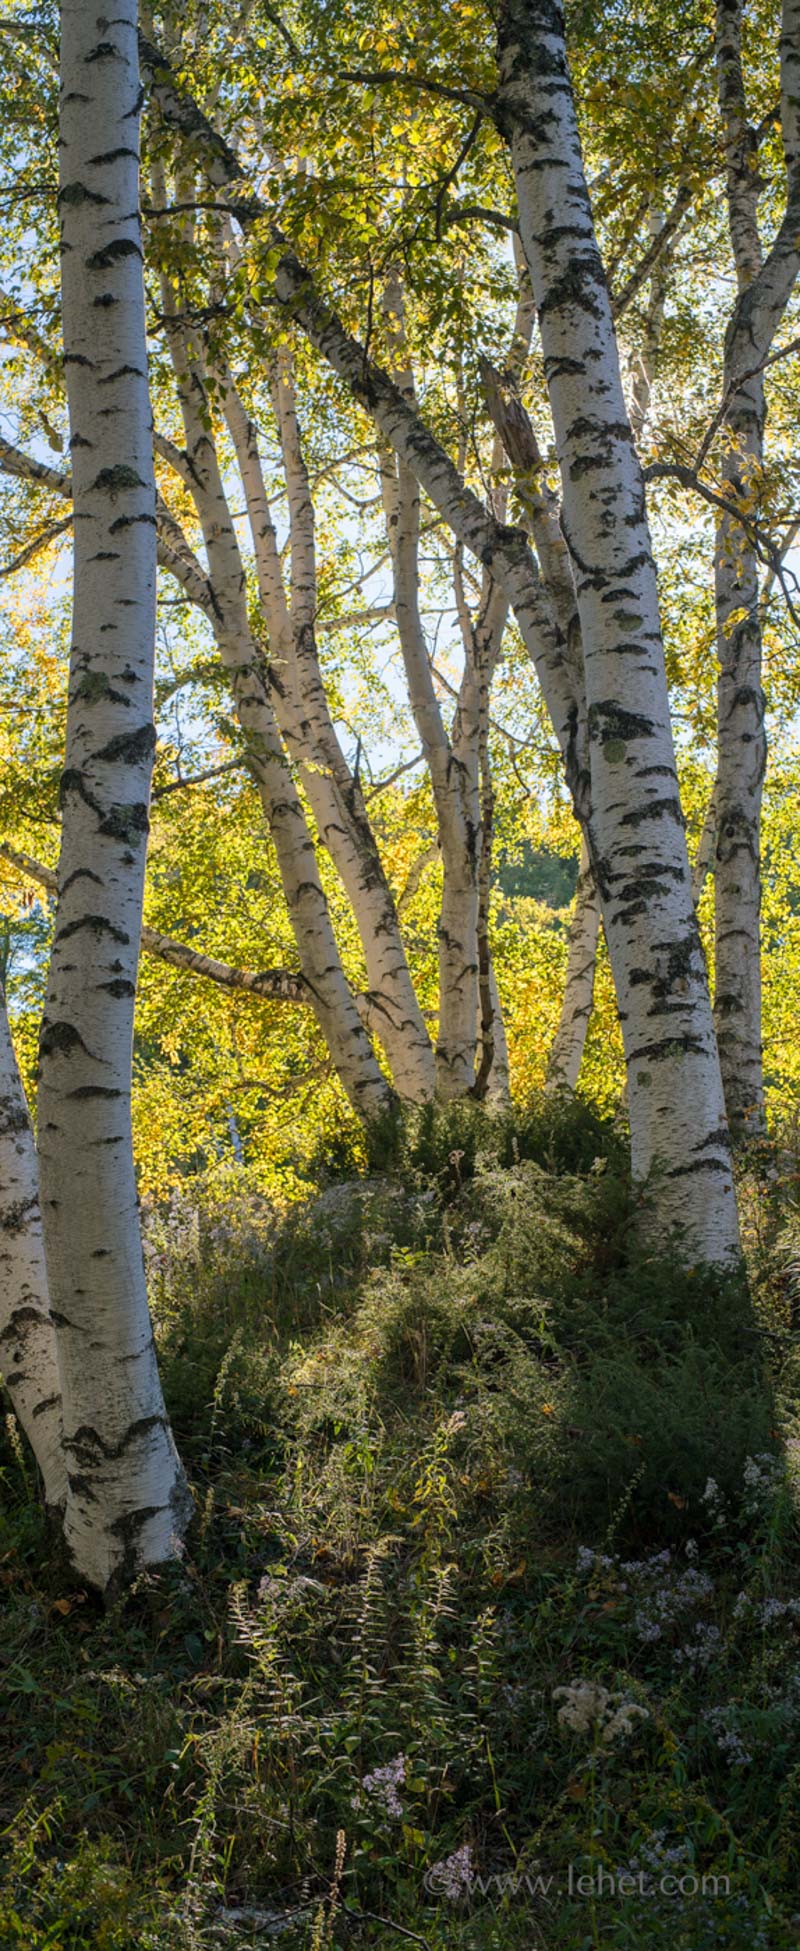 Yellow Leaf Birches and Asters Panorama